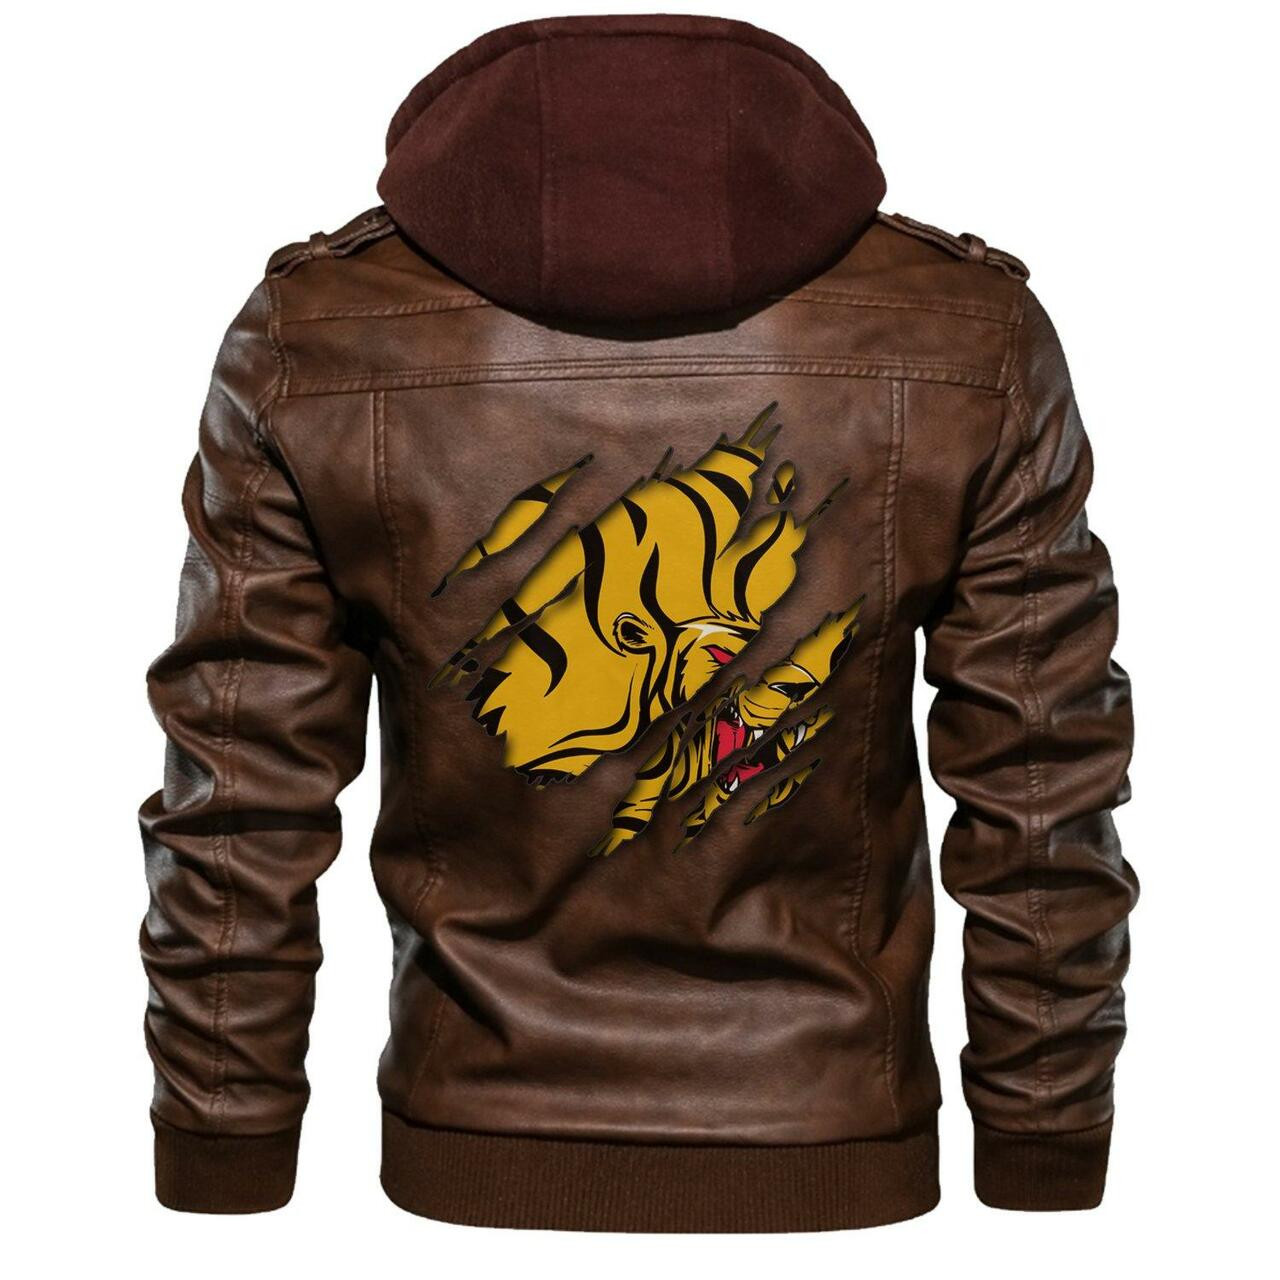 Check out and find the right leather jacket below 165